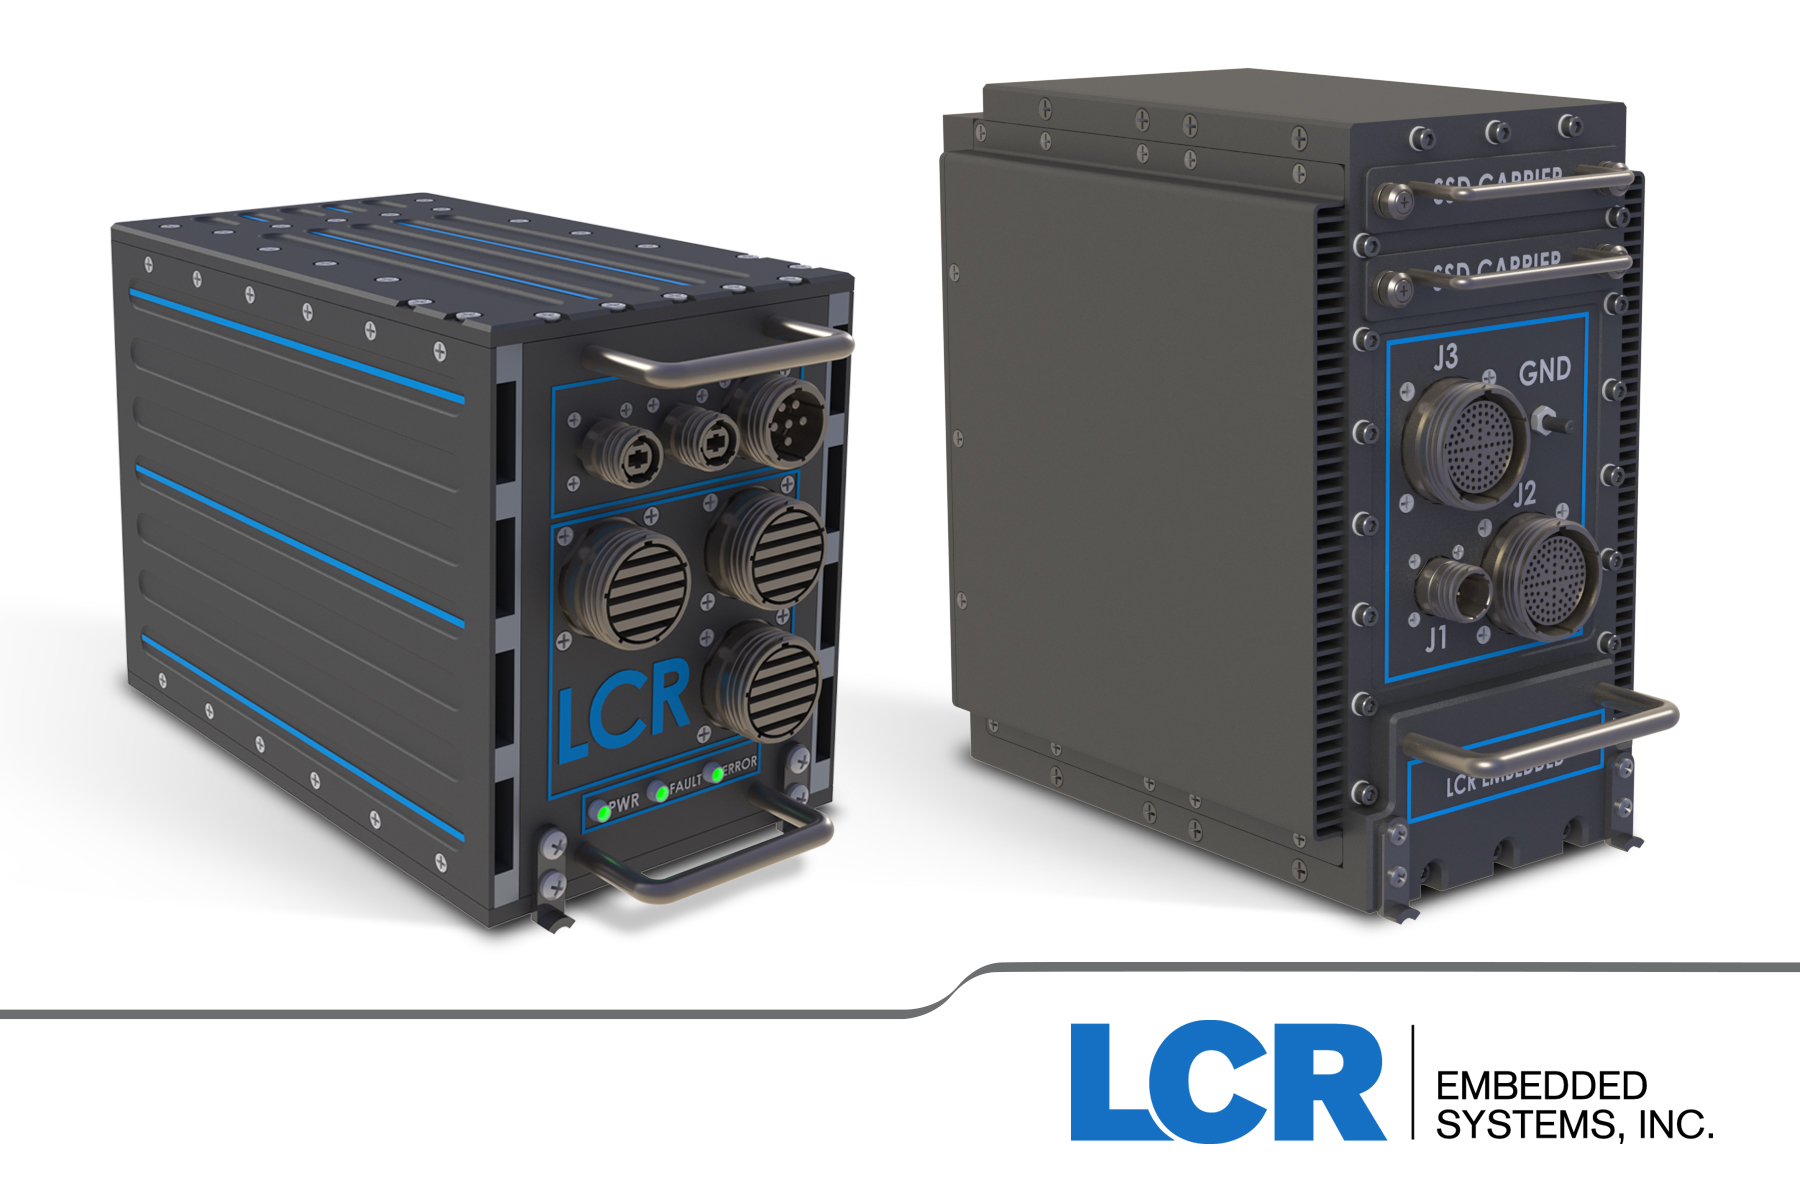 LCR AoC3U-400 series of ATR chassis for SOSA Aligned and VPX Module Payloads